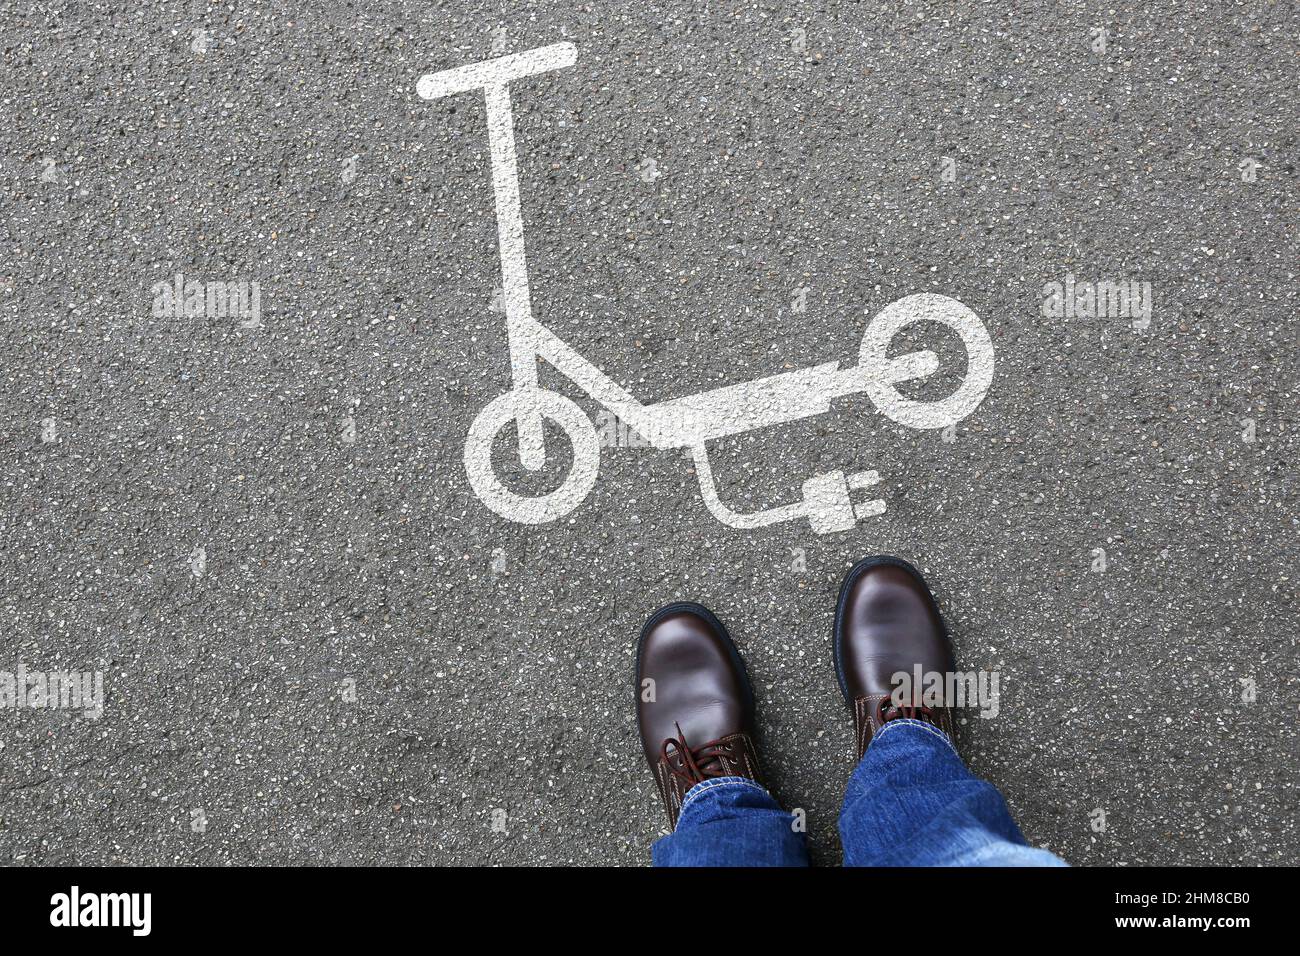 Man people electric scooter e-scooter road sign eco friendly mobility city transport transportation Stock Photo